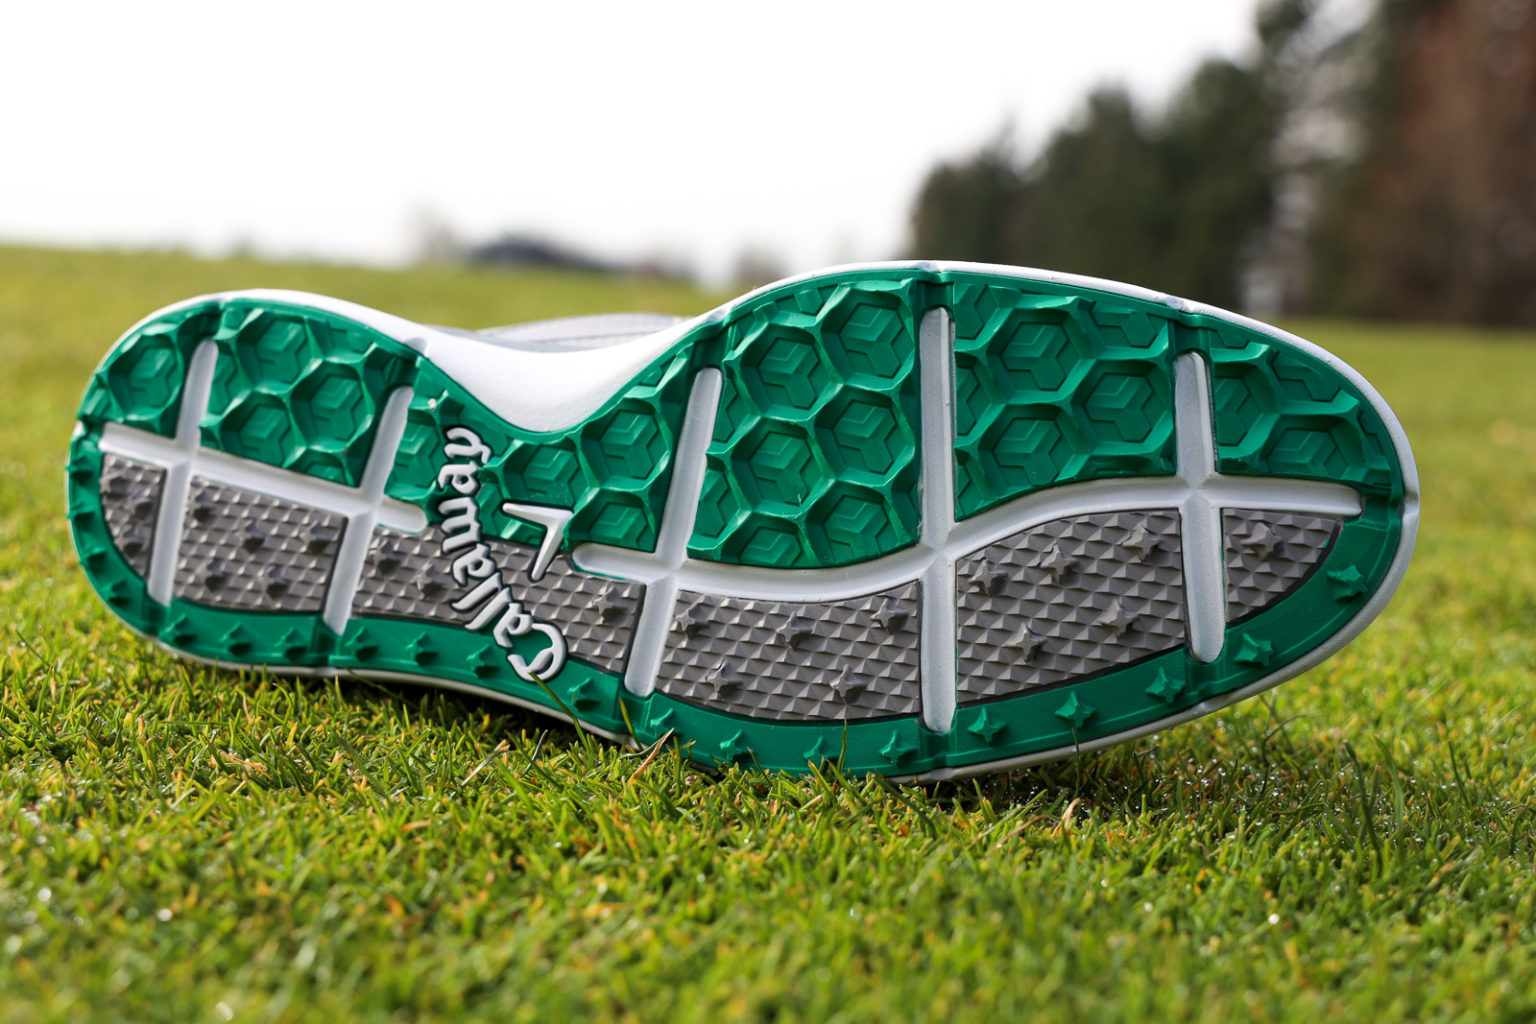 Callaway Golf Shoes: Is the Oceanside the Next Great Spikeless Shoe?